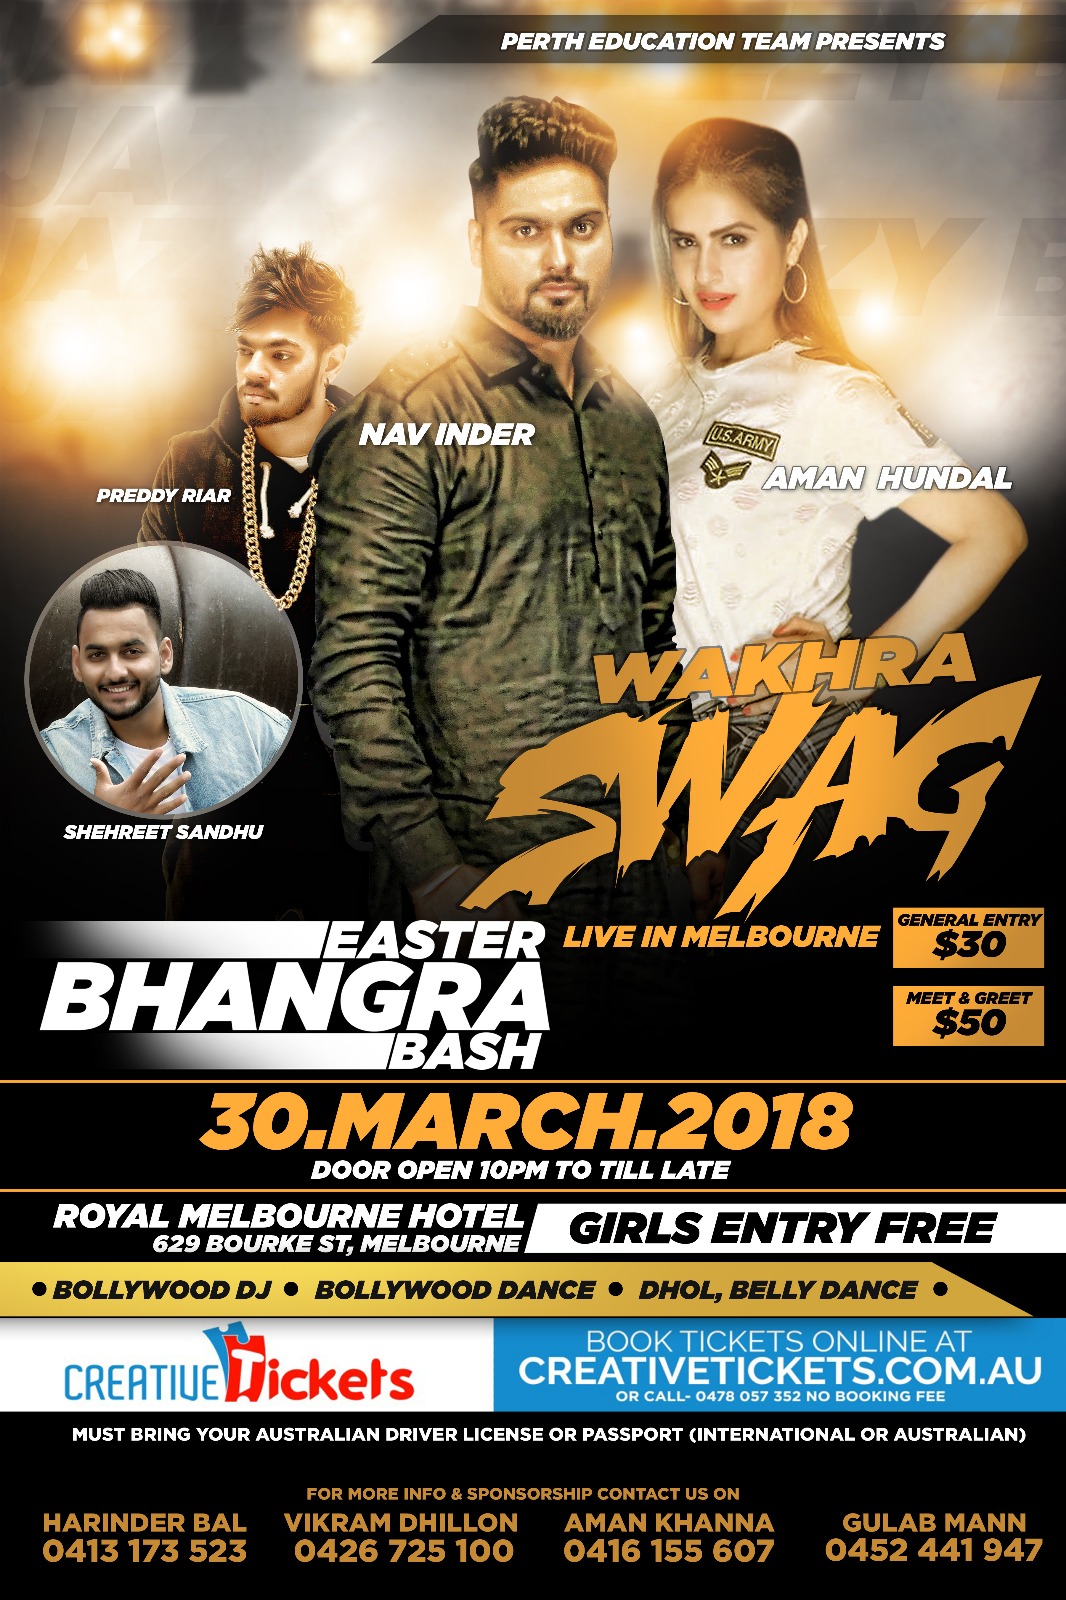 Press flyer image CREATIVE EVENTS PRESENTS - EASTER BHANGRA BASH - FRIDAY 30 MARCH, 2018